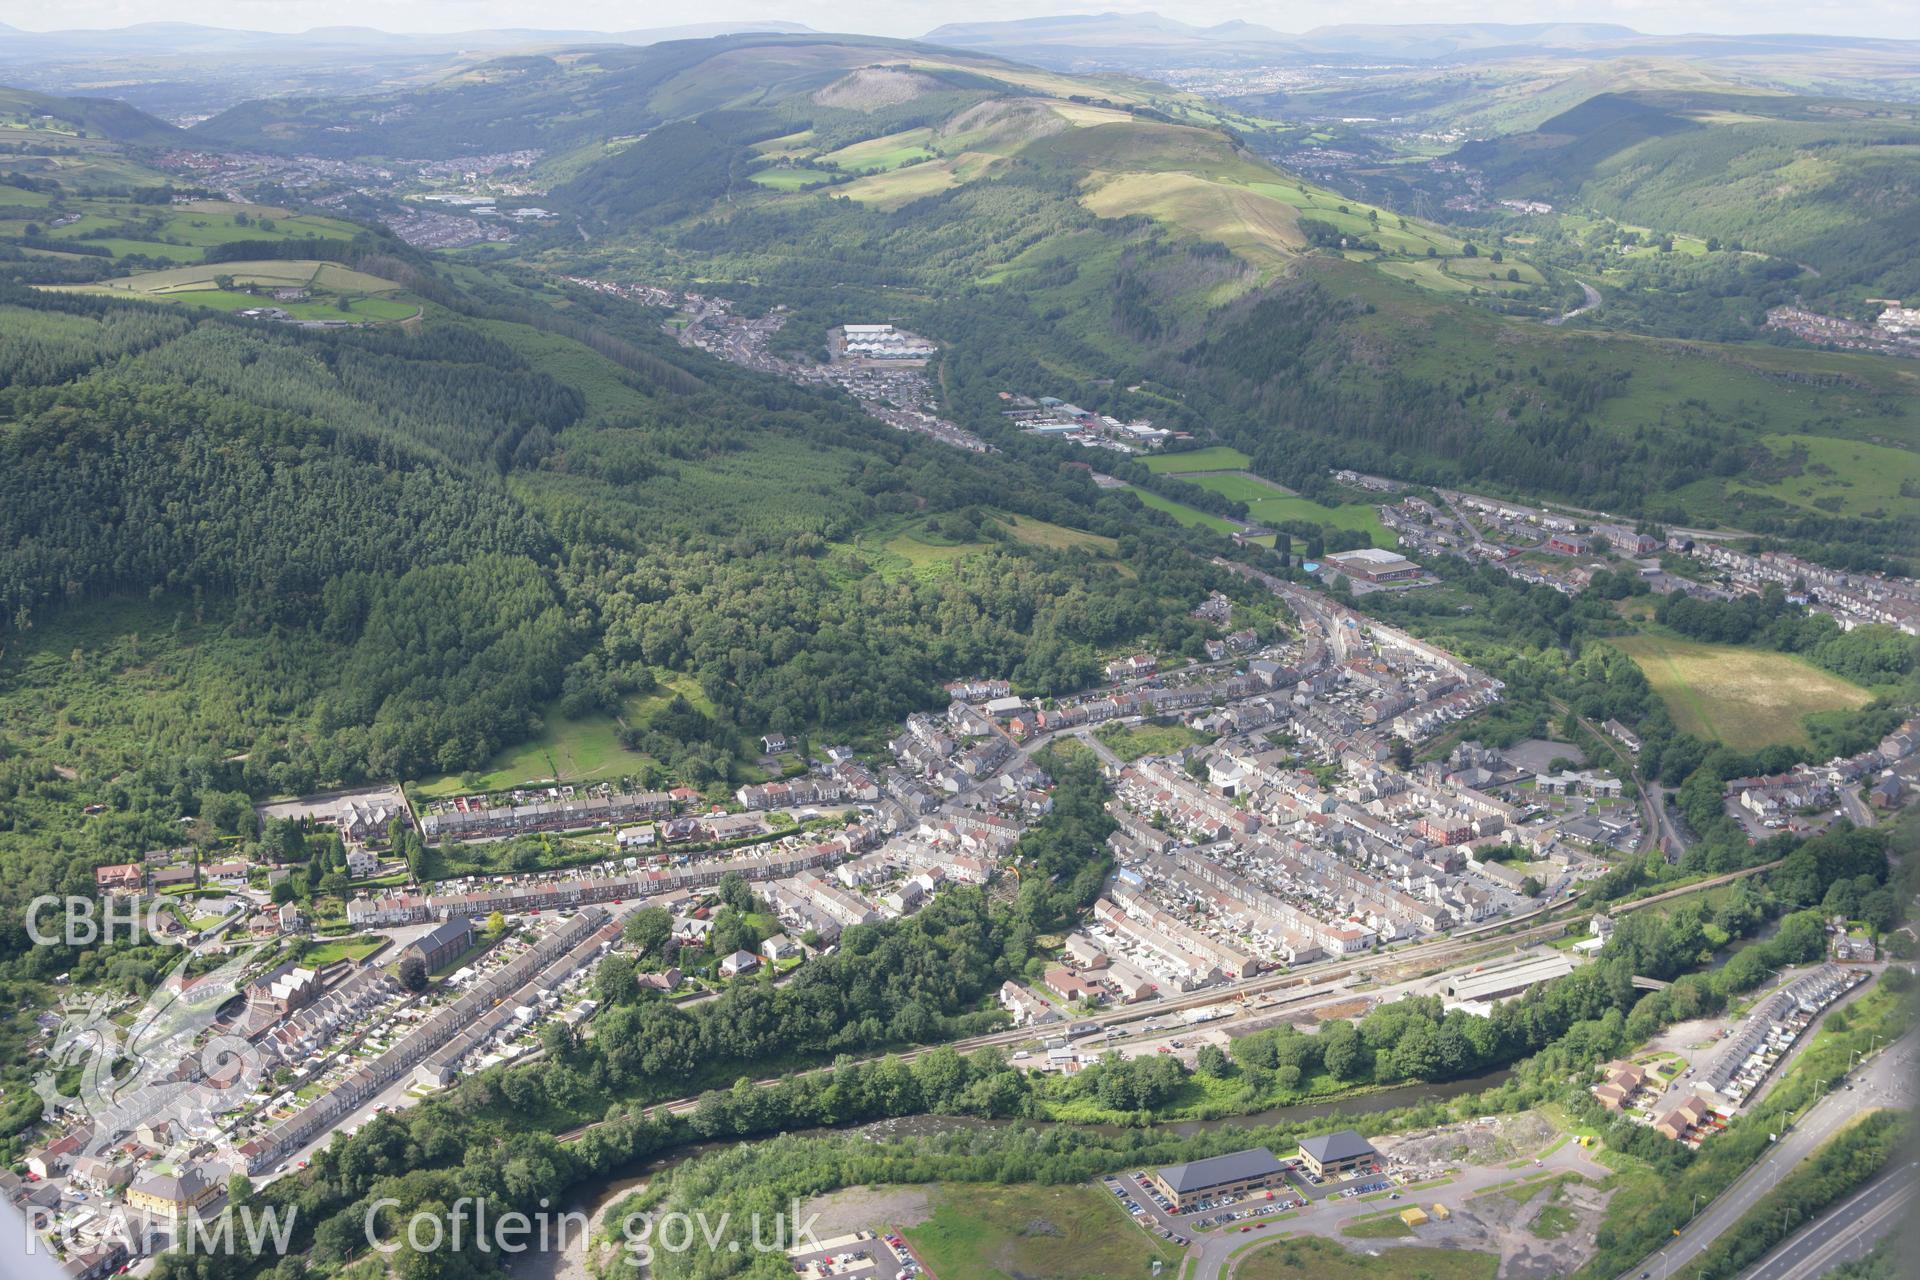 RCAHMW colour oblique aerial photograph of Abercynon Station, in landscape view from the south. Taken on 30 July 2007 by Toby Driver